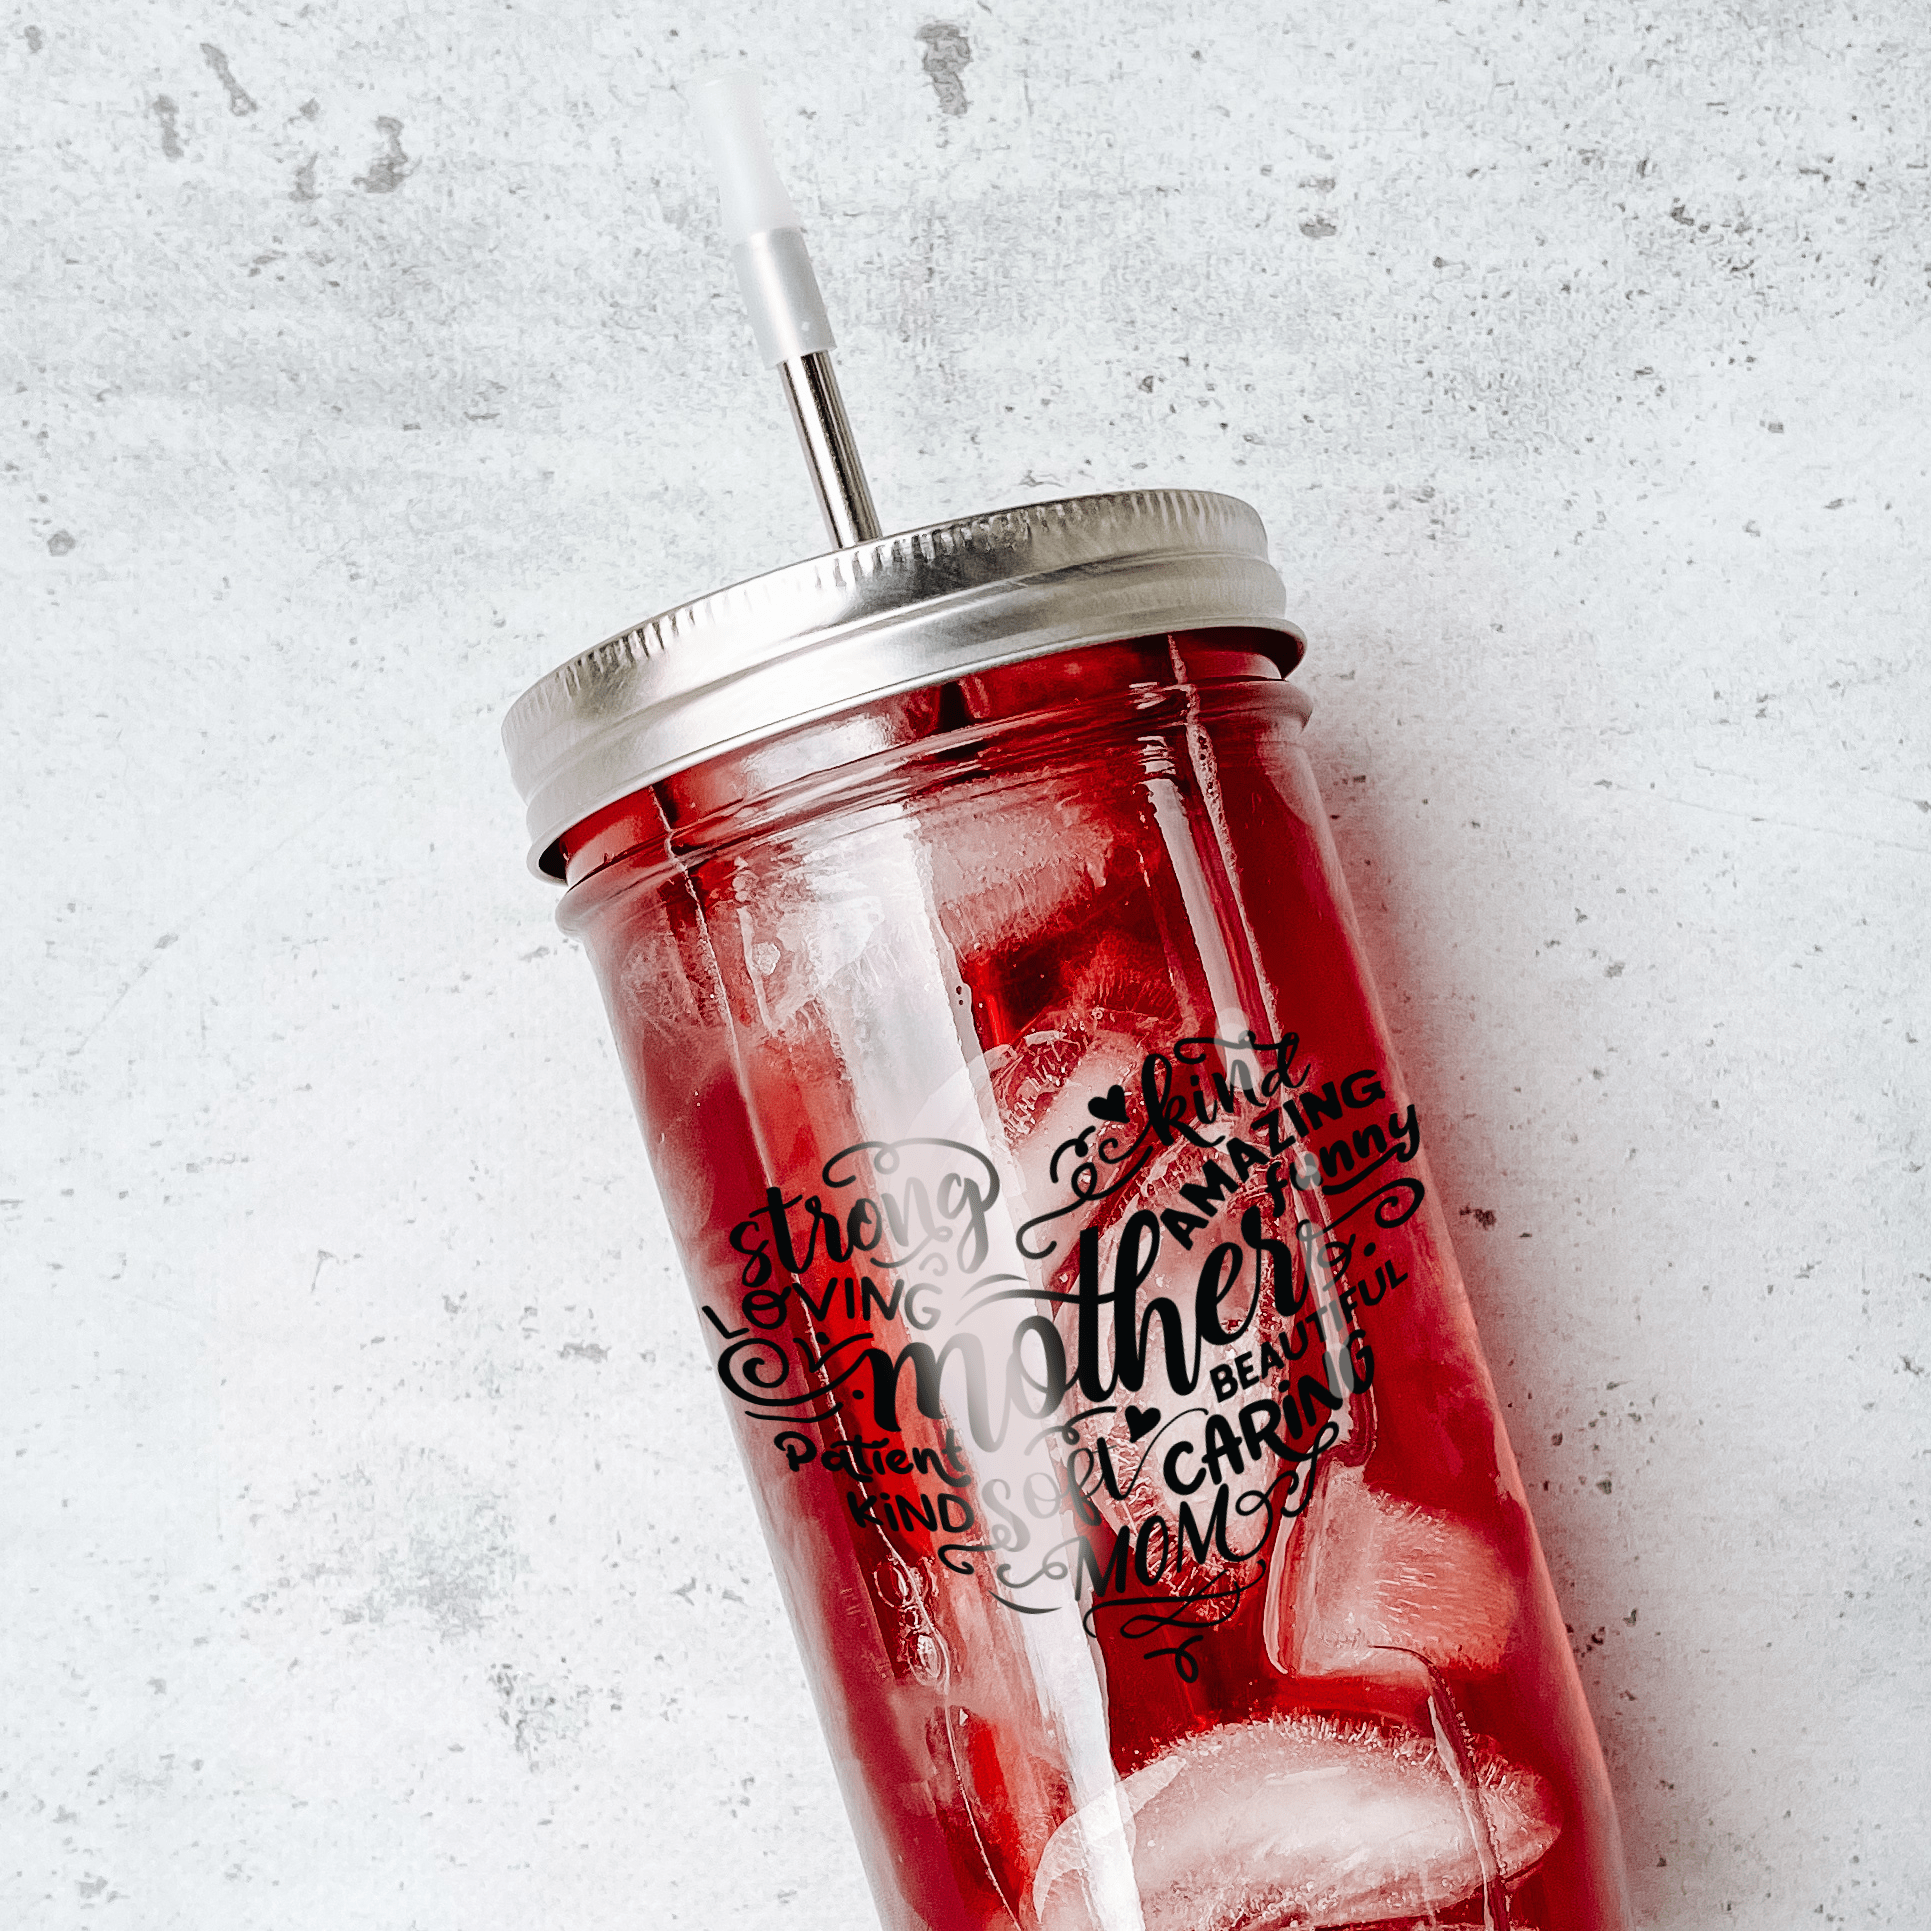 Mason jar tumbler with red drink and a silver straw and lid with print that reads "mother" in black surrounded by descriptive words for mother in black too. Against marble background.